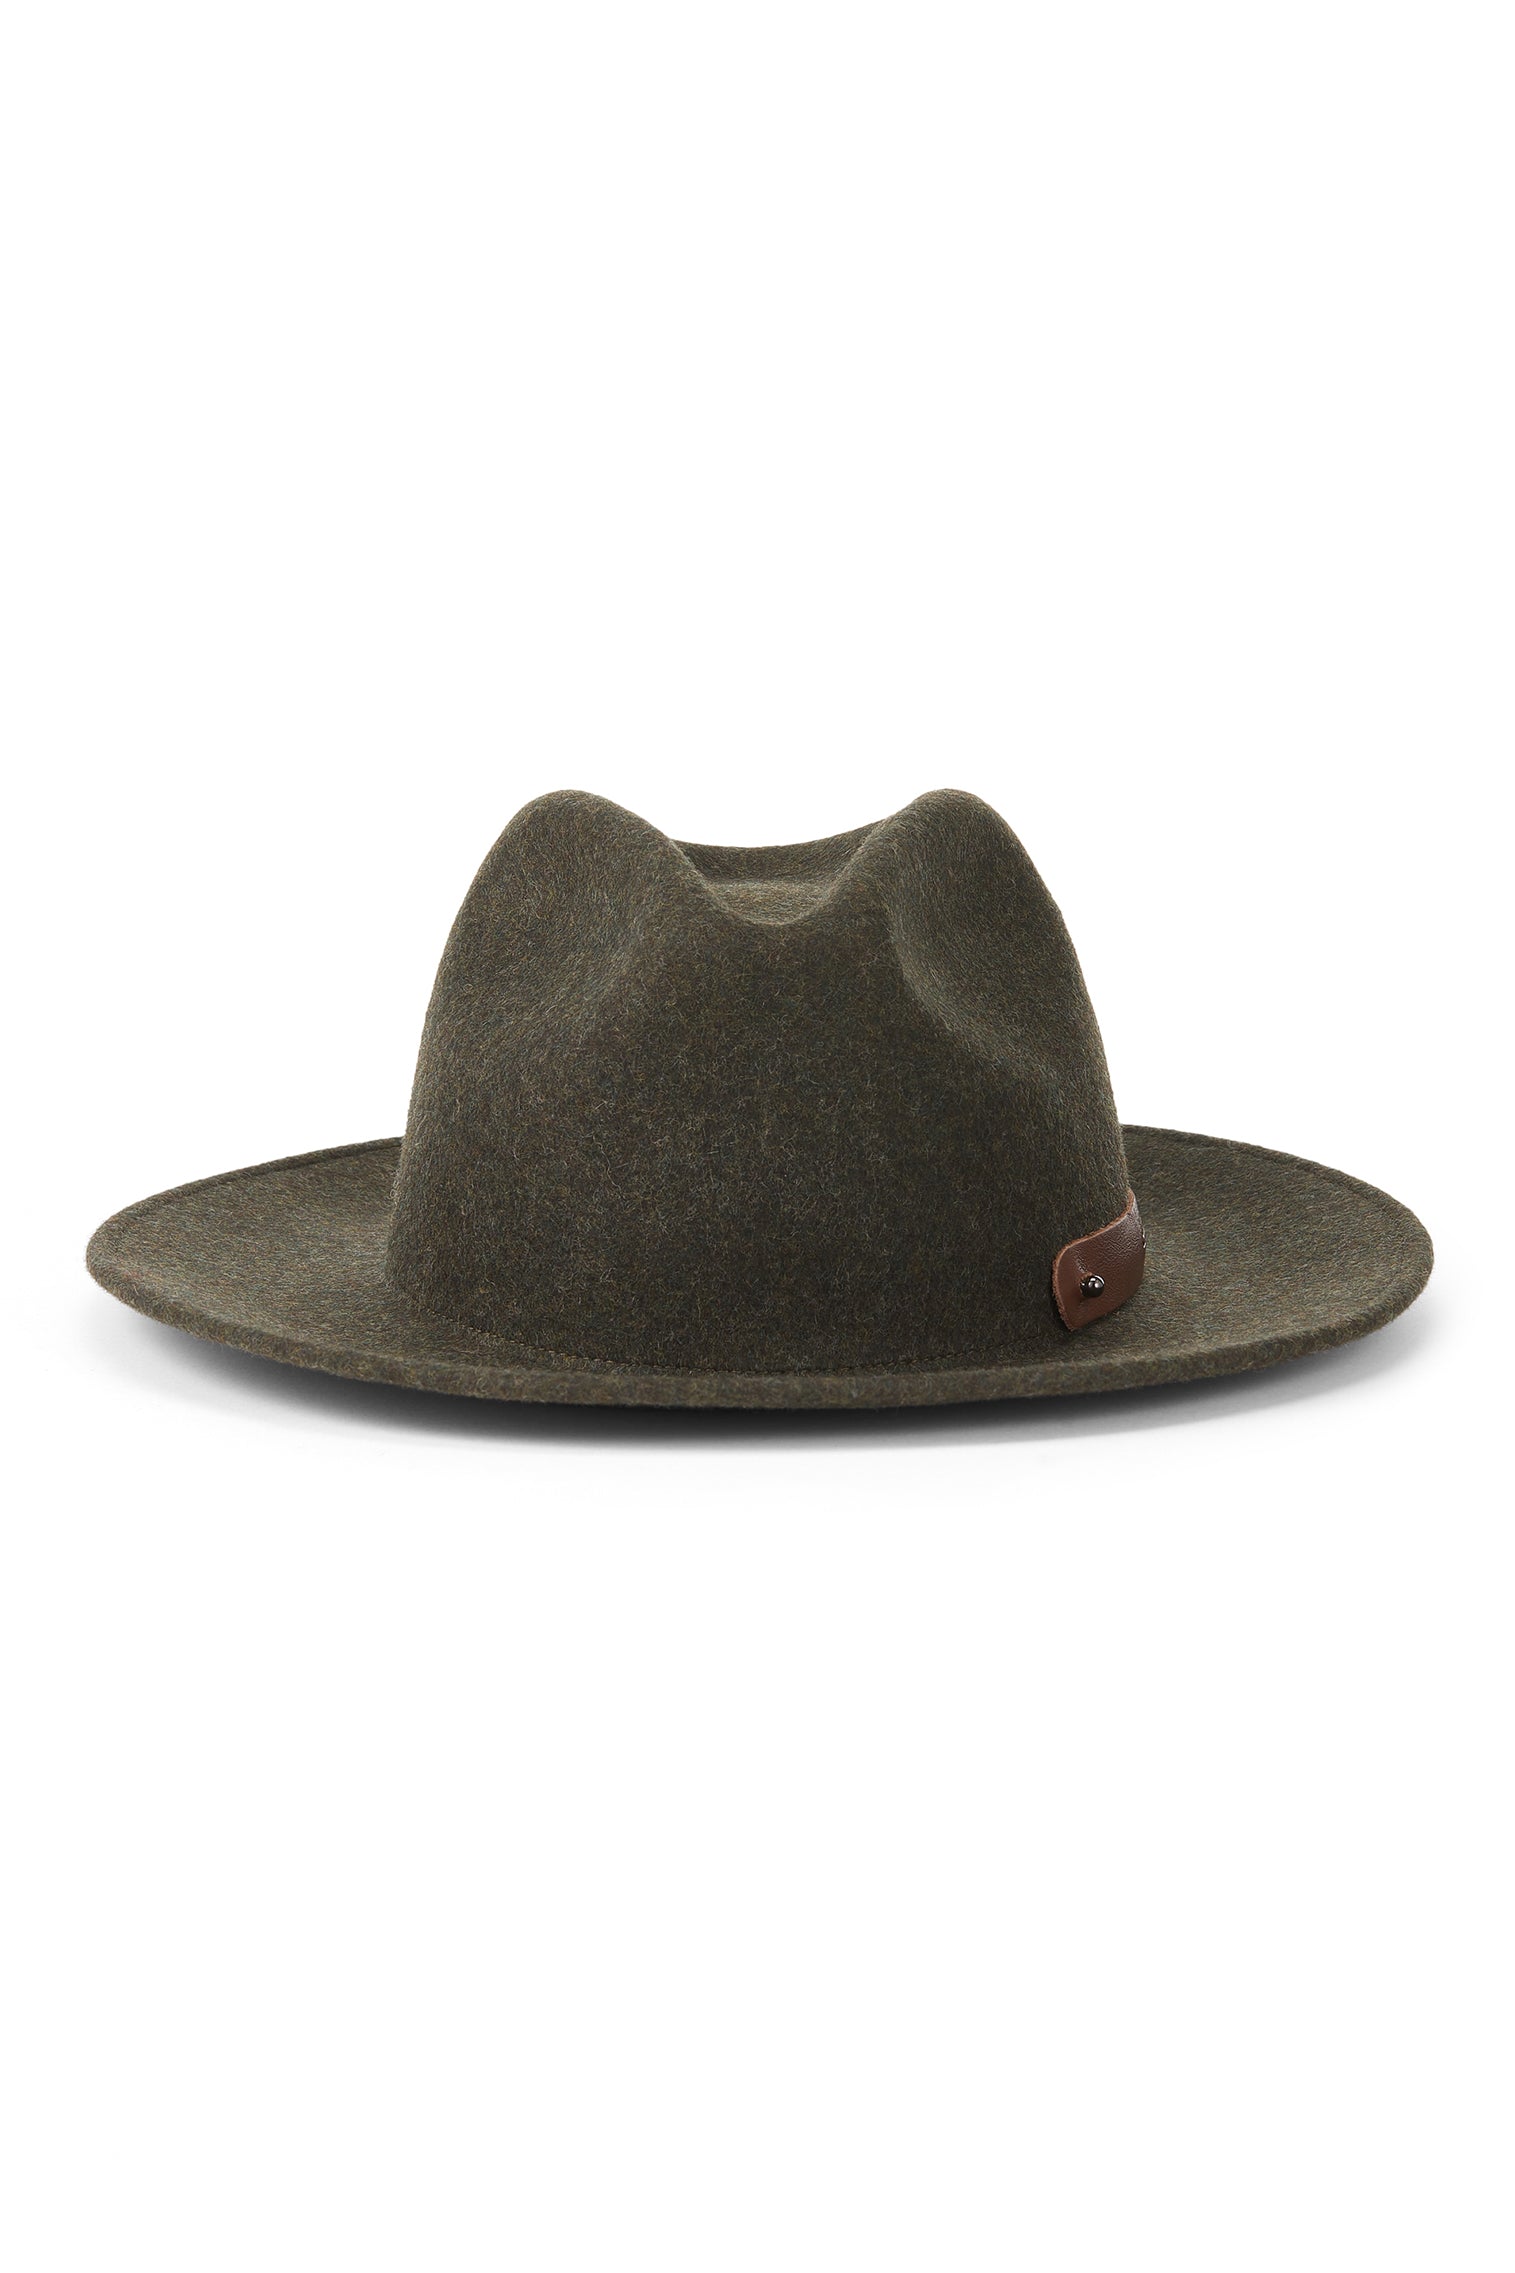 Cheltenham Rollable Trilby - All Ready to Wear - Lock & Co. Hatters London UK